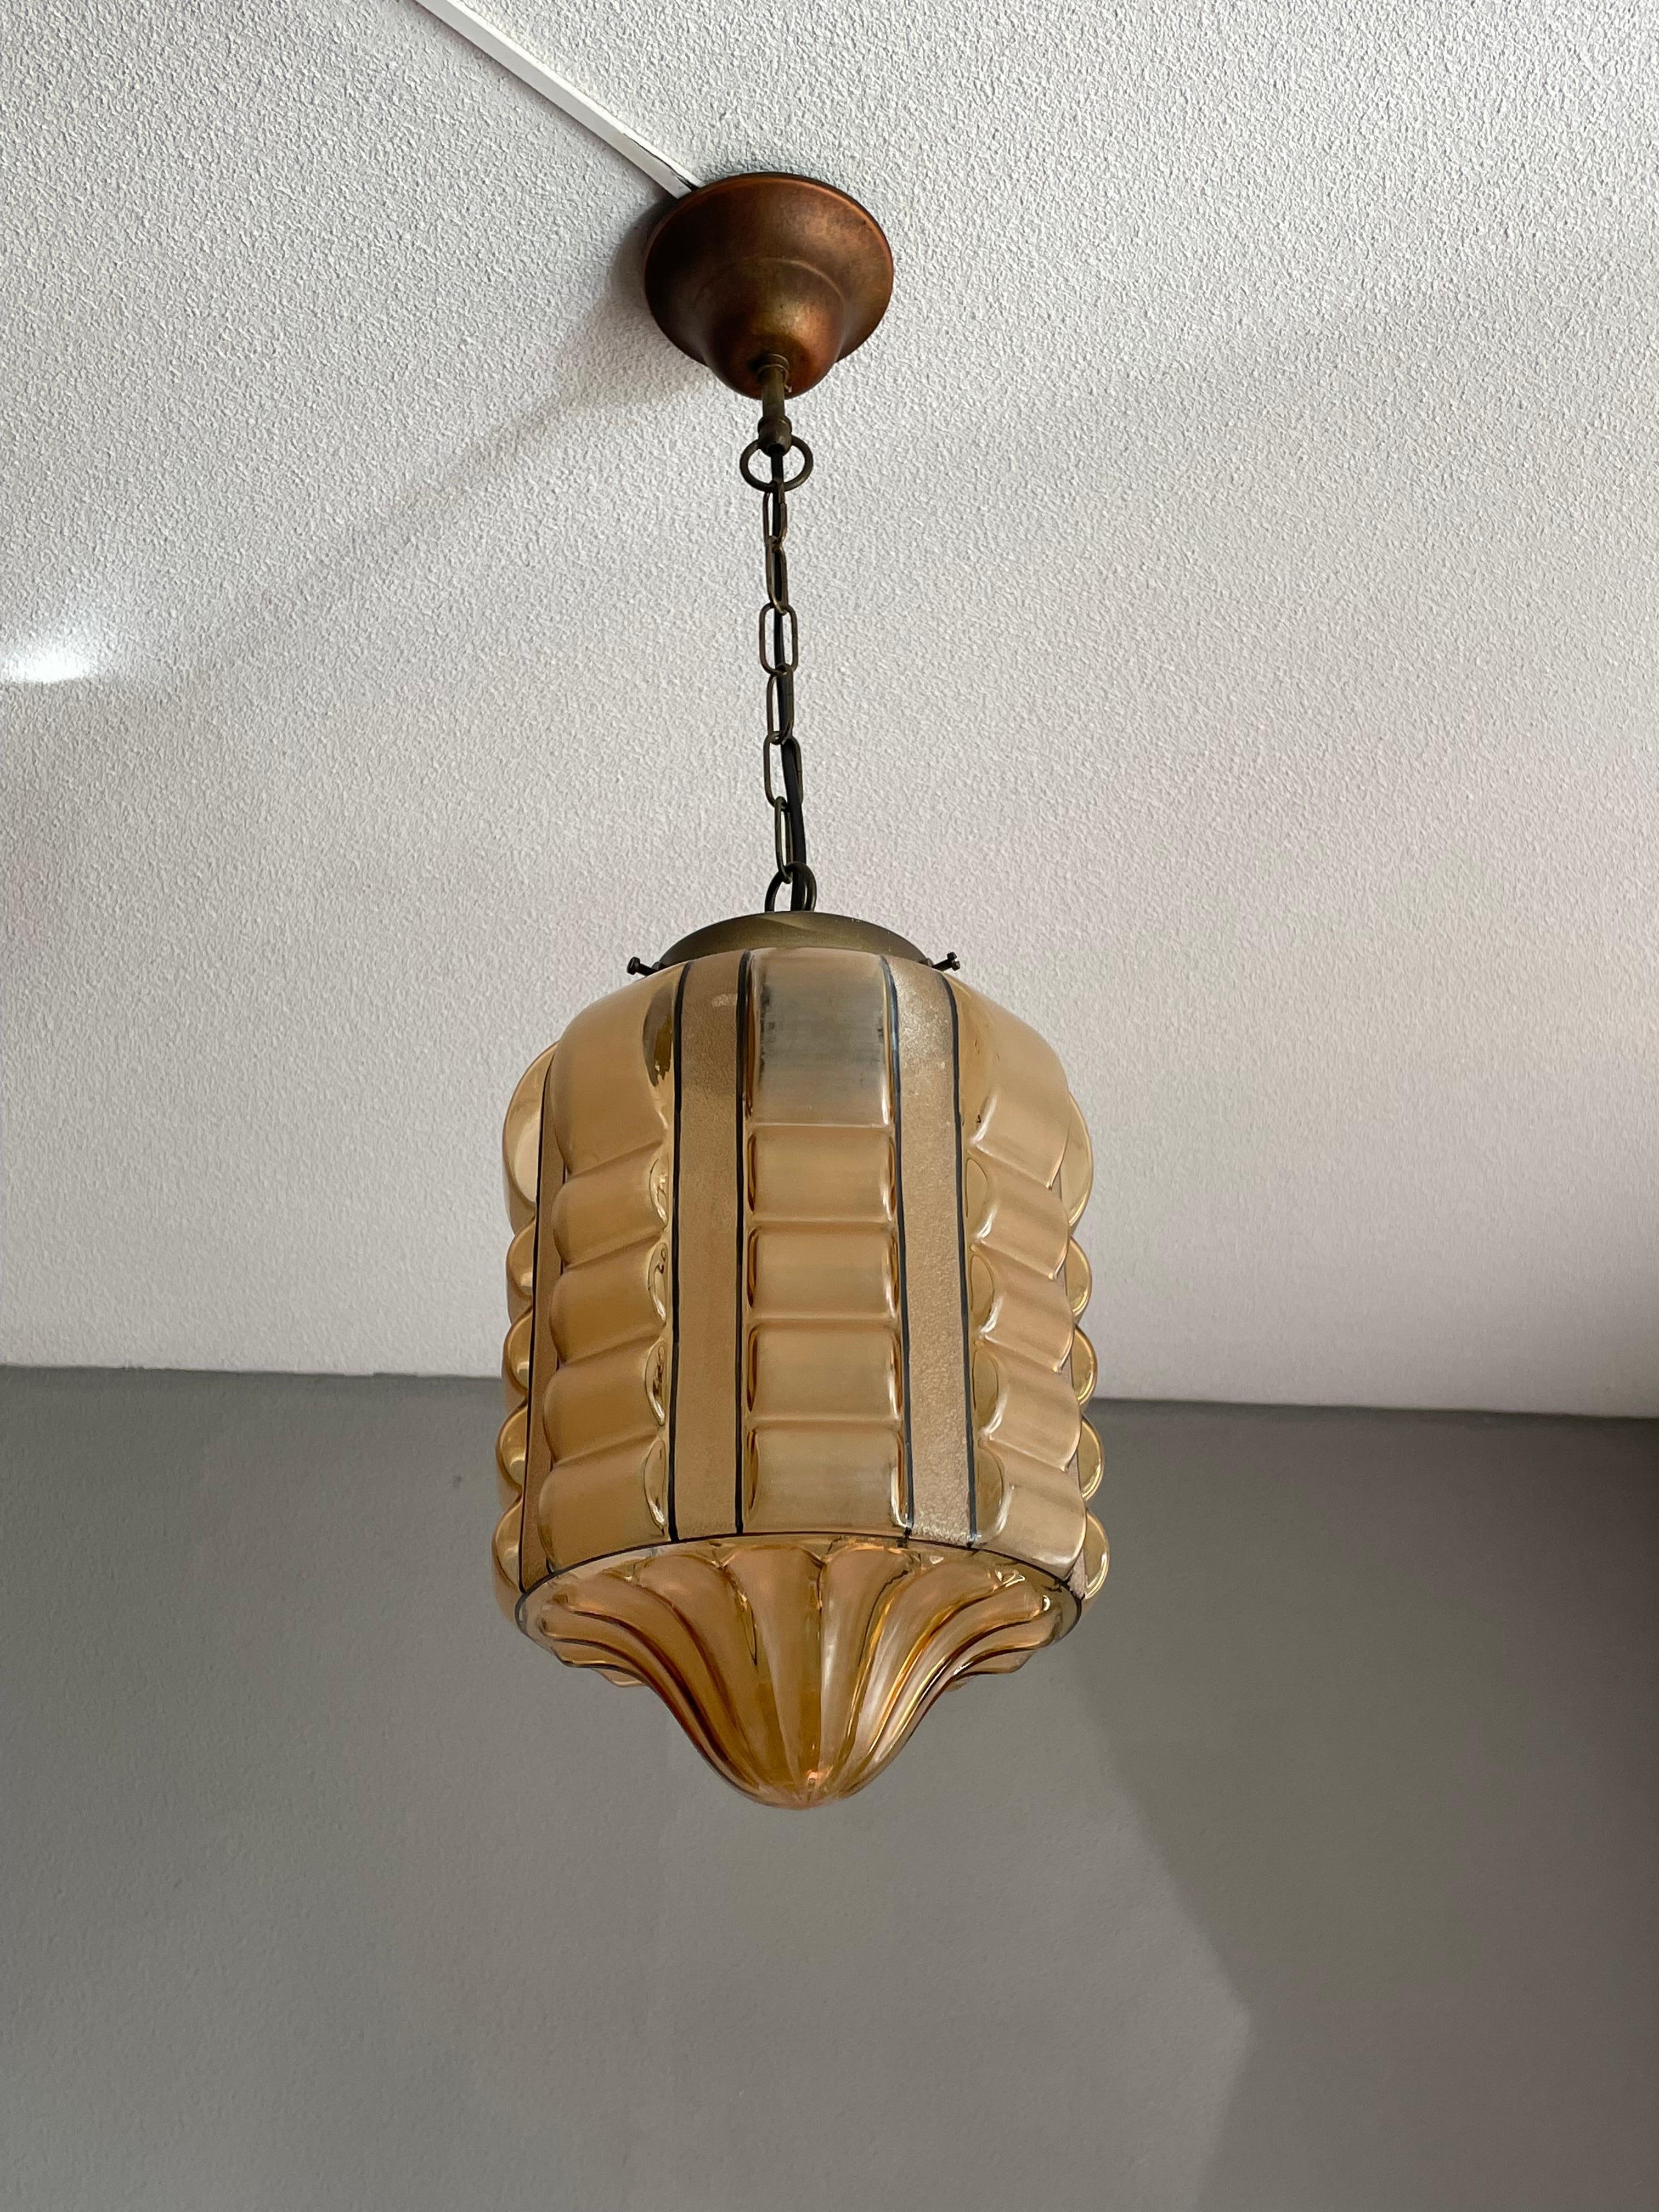 Beautiful shape and great amber color Art Deco hallway pendant.

This rare Art Deco glass pendant with its wonderful colors and striking, geometrical design could be the perfect light fixture for your entrance or bedroom. The warm light that it